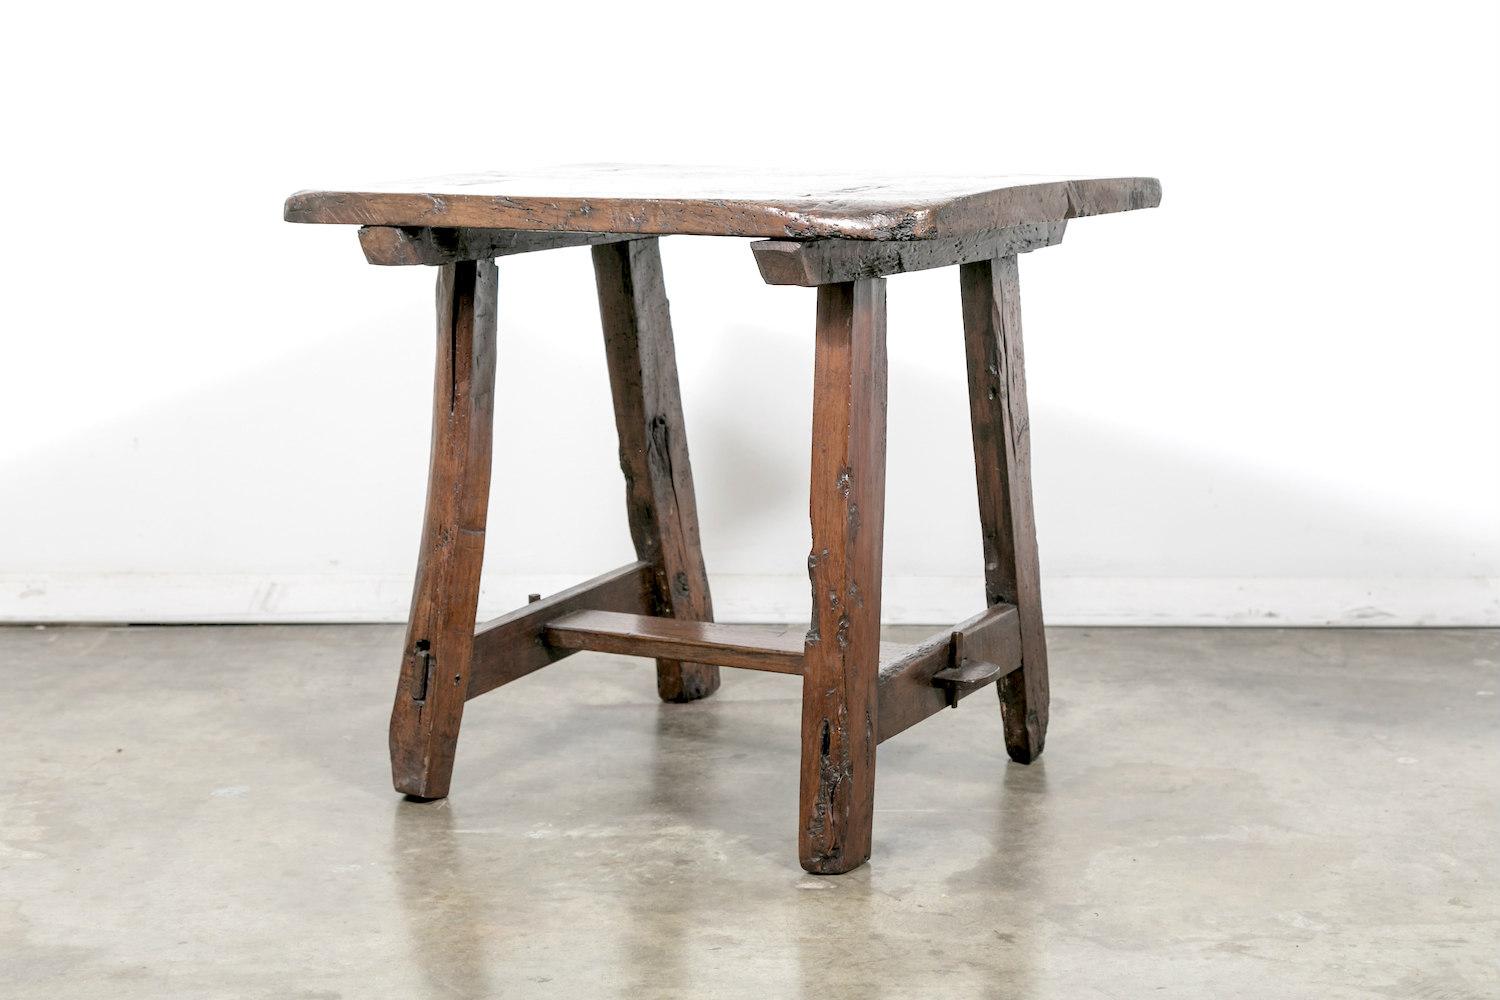 A charming French Country side or occasional table handcrafted of fruitwood in the South of France during the mid-18th century. Perfect as a little drink table or end table, this very rustic table with its wonderful aged patina, has tons of